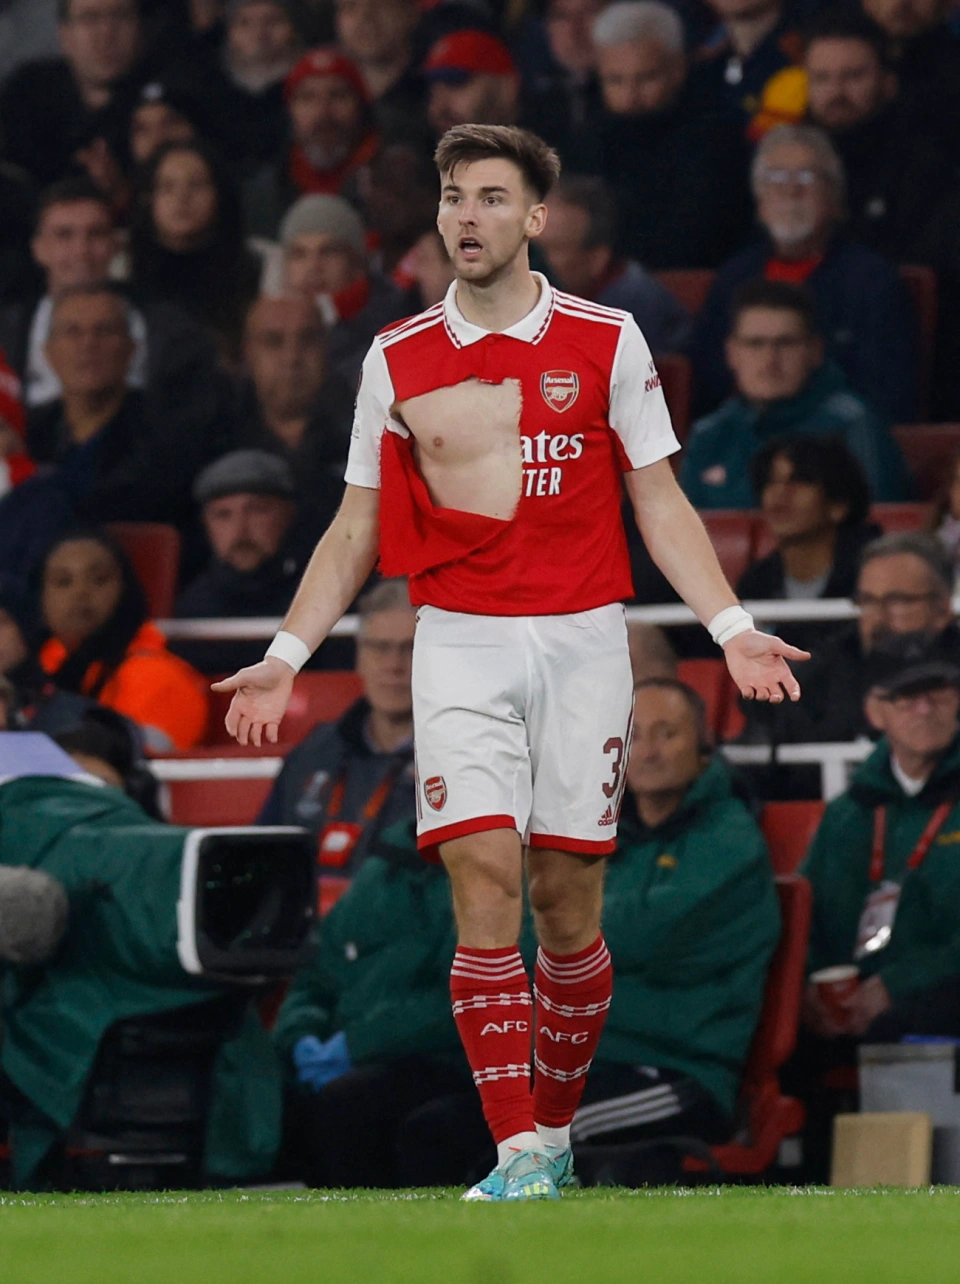 Tierney's jersey almost ripped off by Zurich opponent after his goal lifted  Arsenal to top of